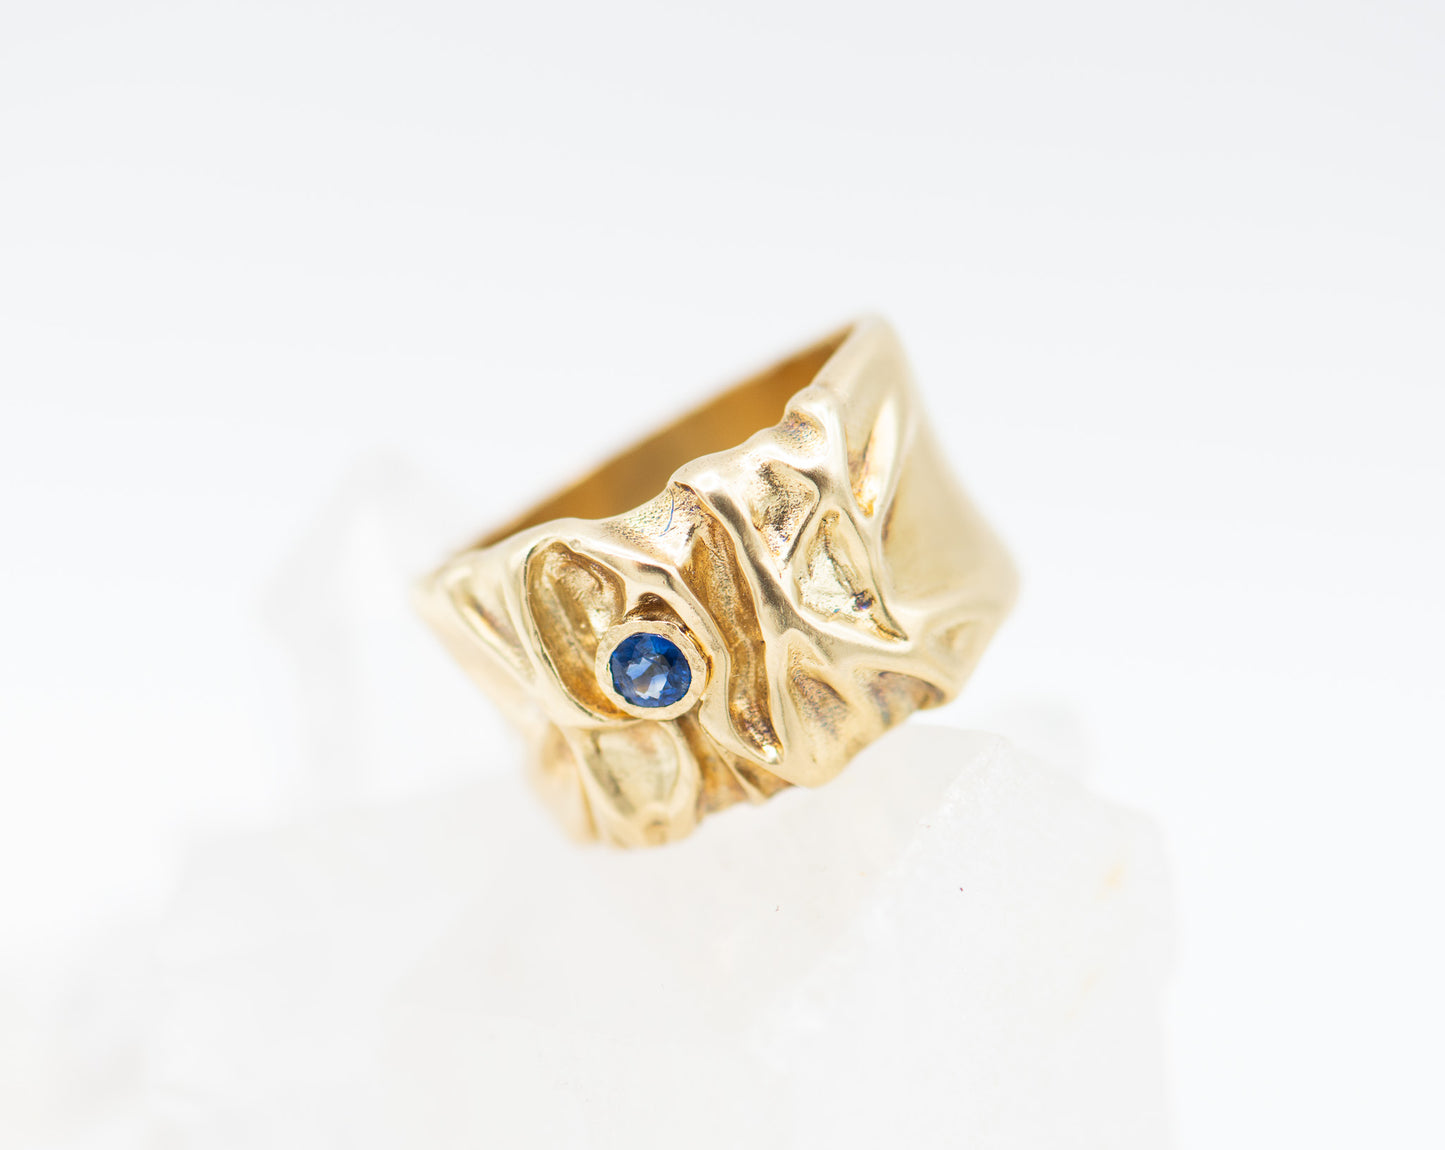 Wrinkled texture Sapphire ring